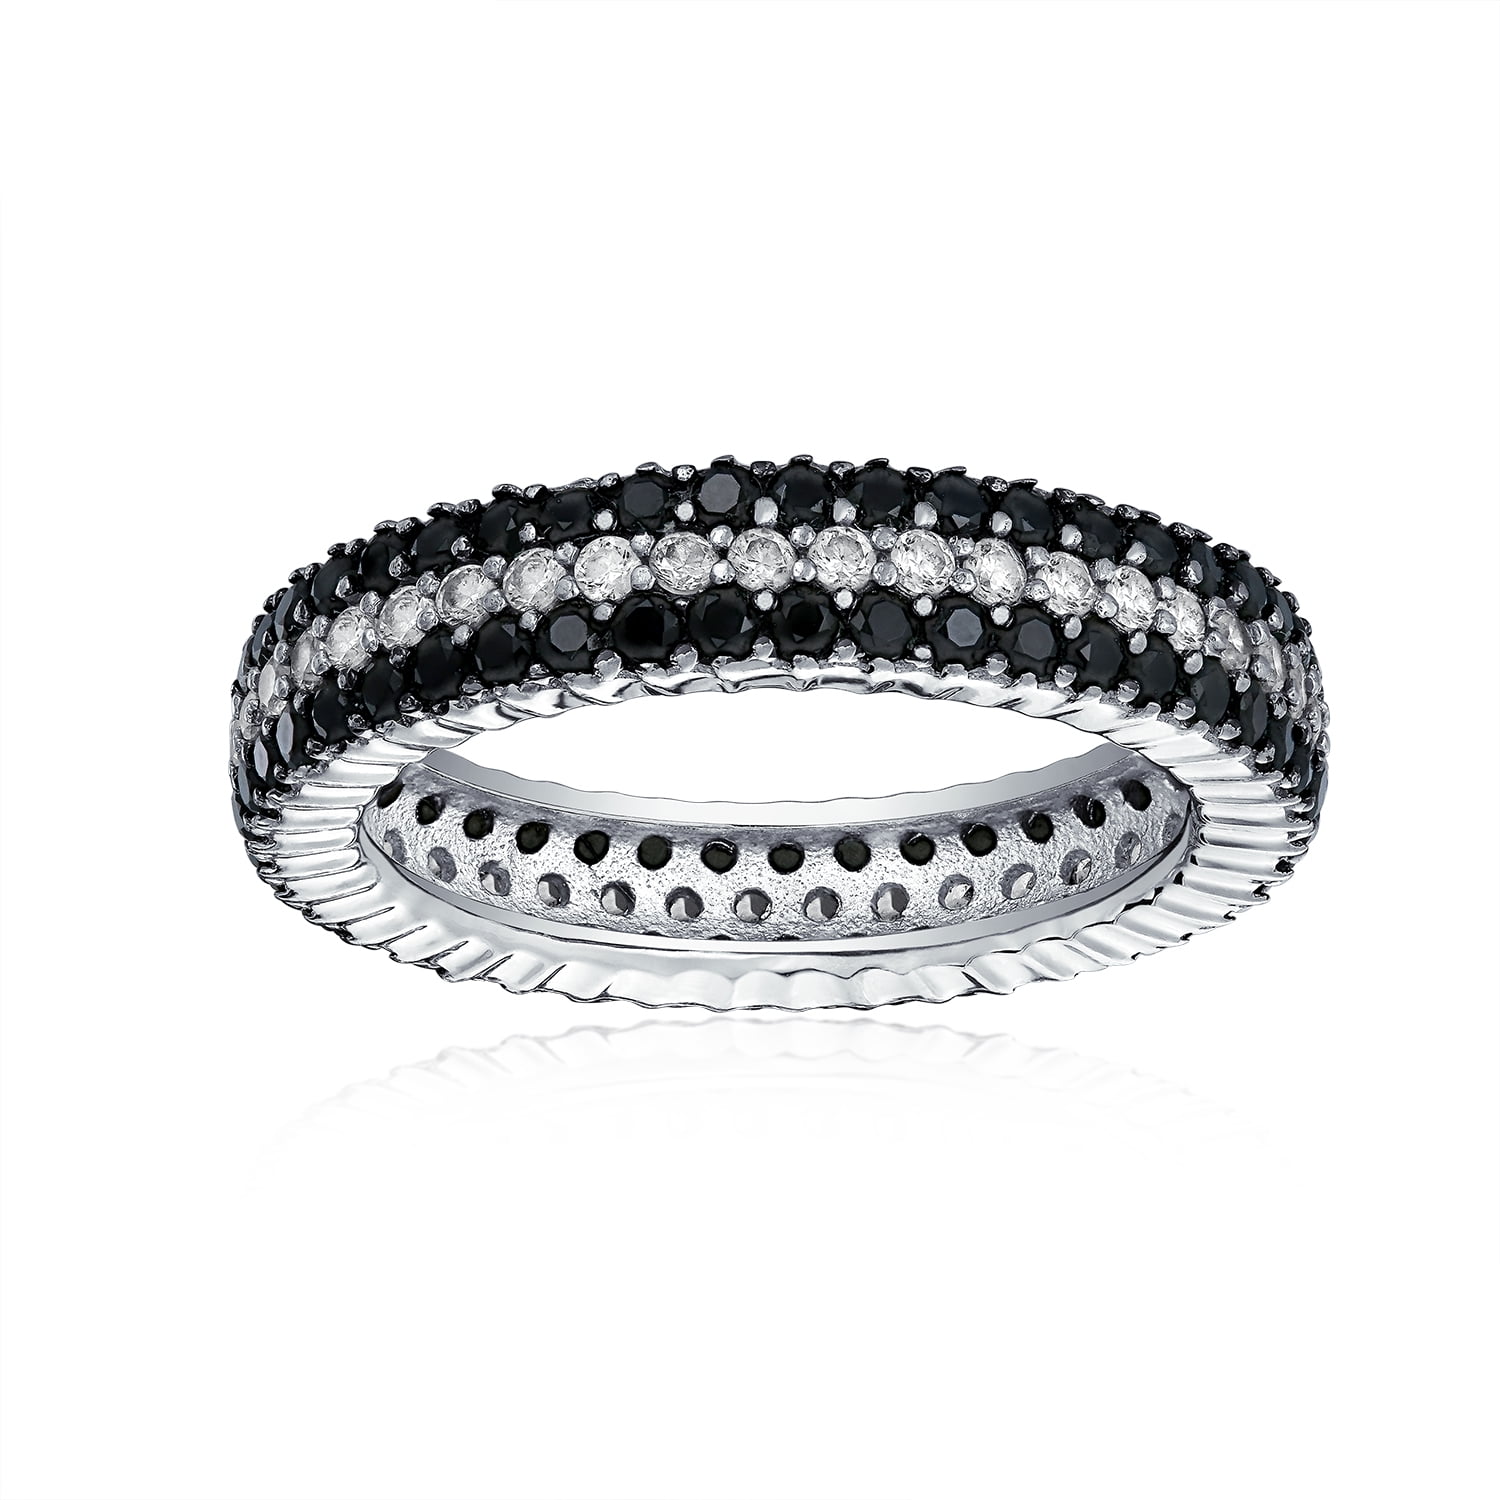 Eternity Band Black Spinel Gemstone 925 Sterling Silver Pave Zigzag Stack Ring 